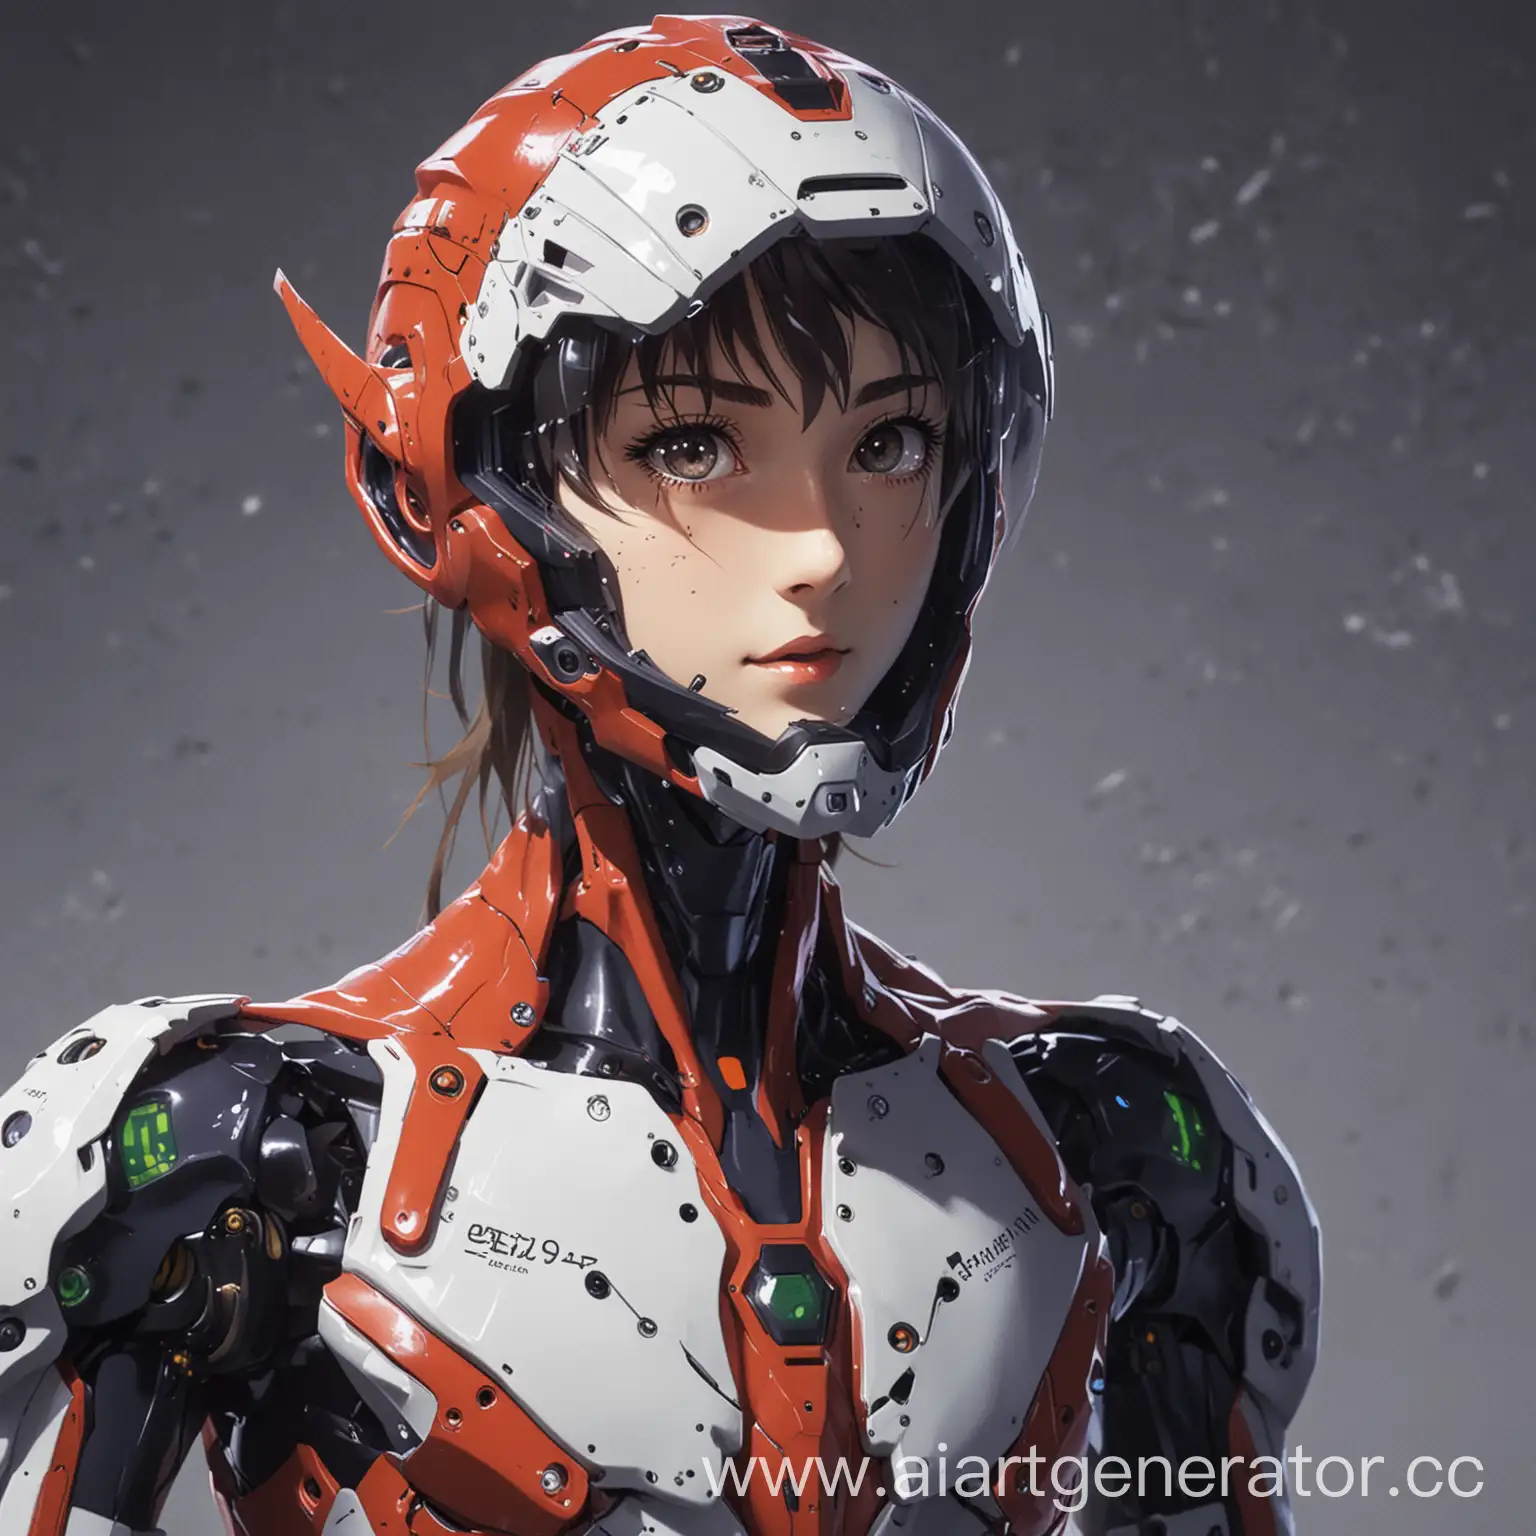 Anime-Neural-Network-Voice-Assistant-in-Evangelion-Style